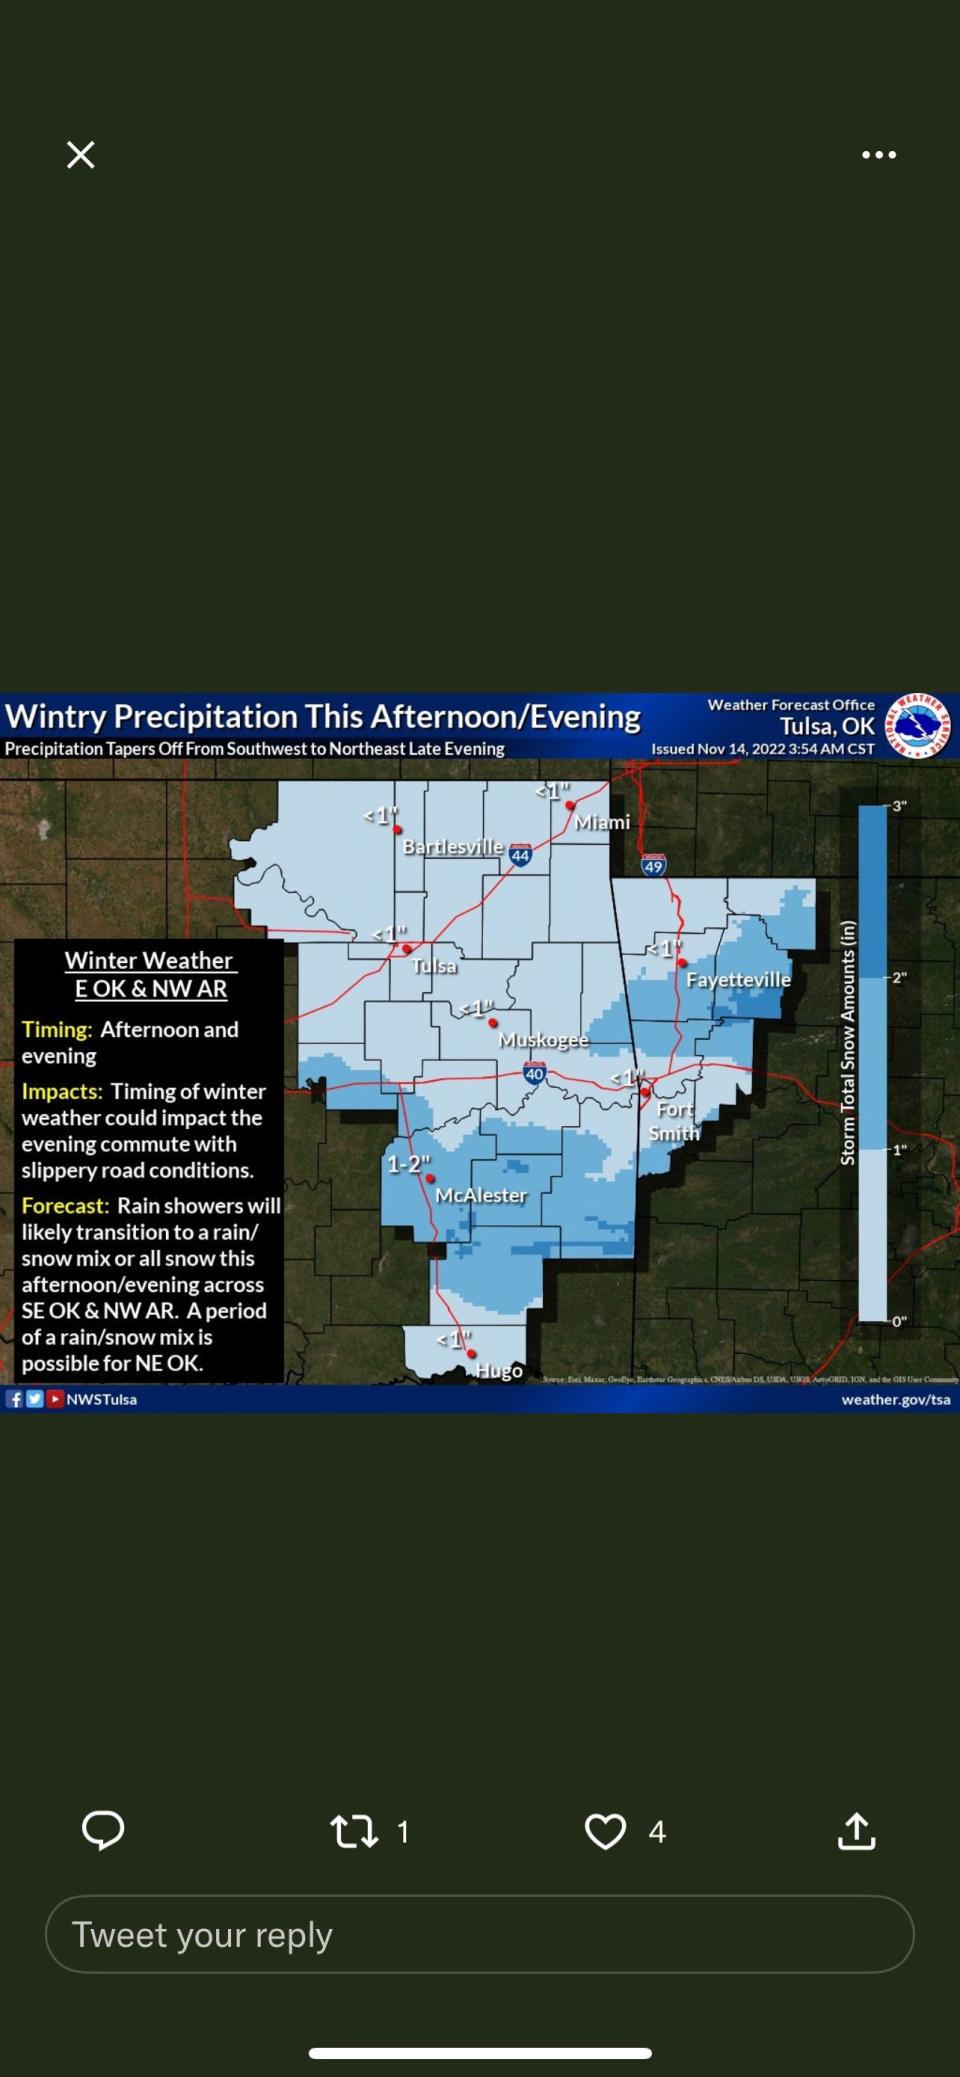 A winter weather advisory has been issued for Fort Smith and parts of western Arkansas.